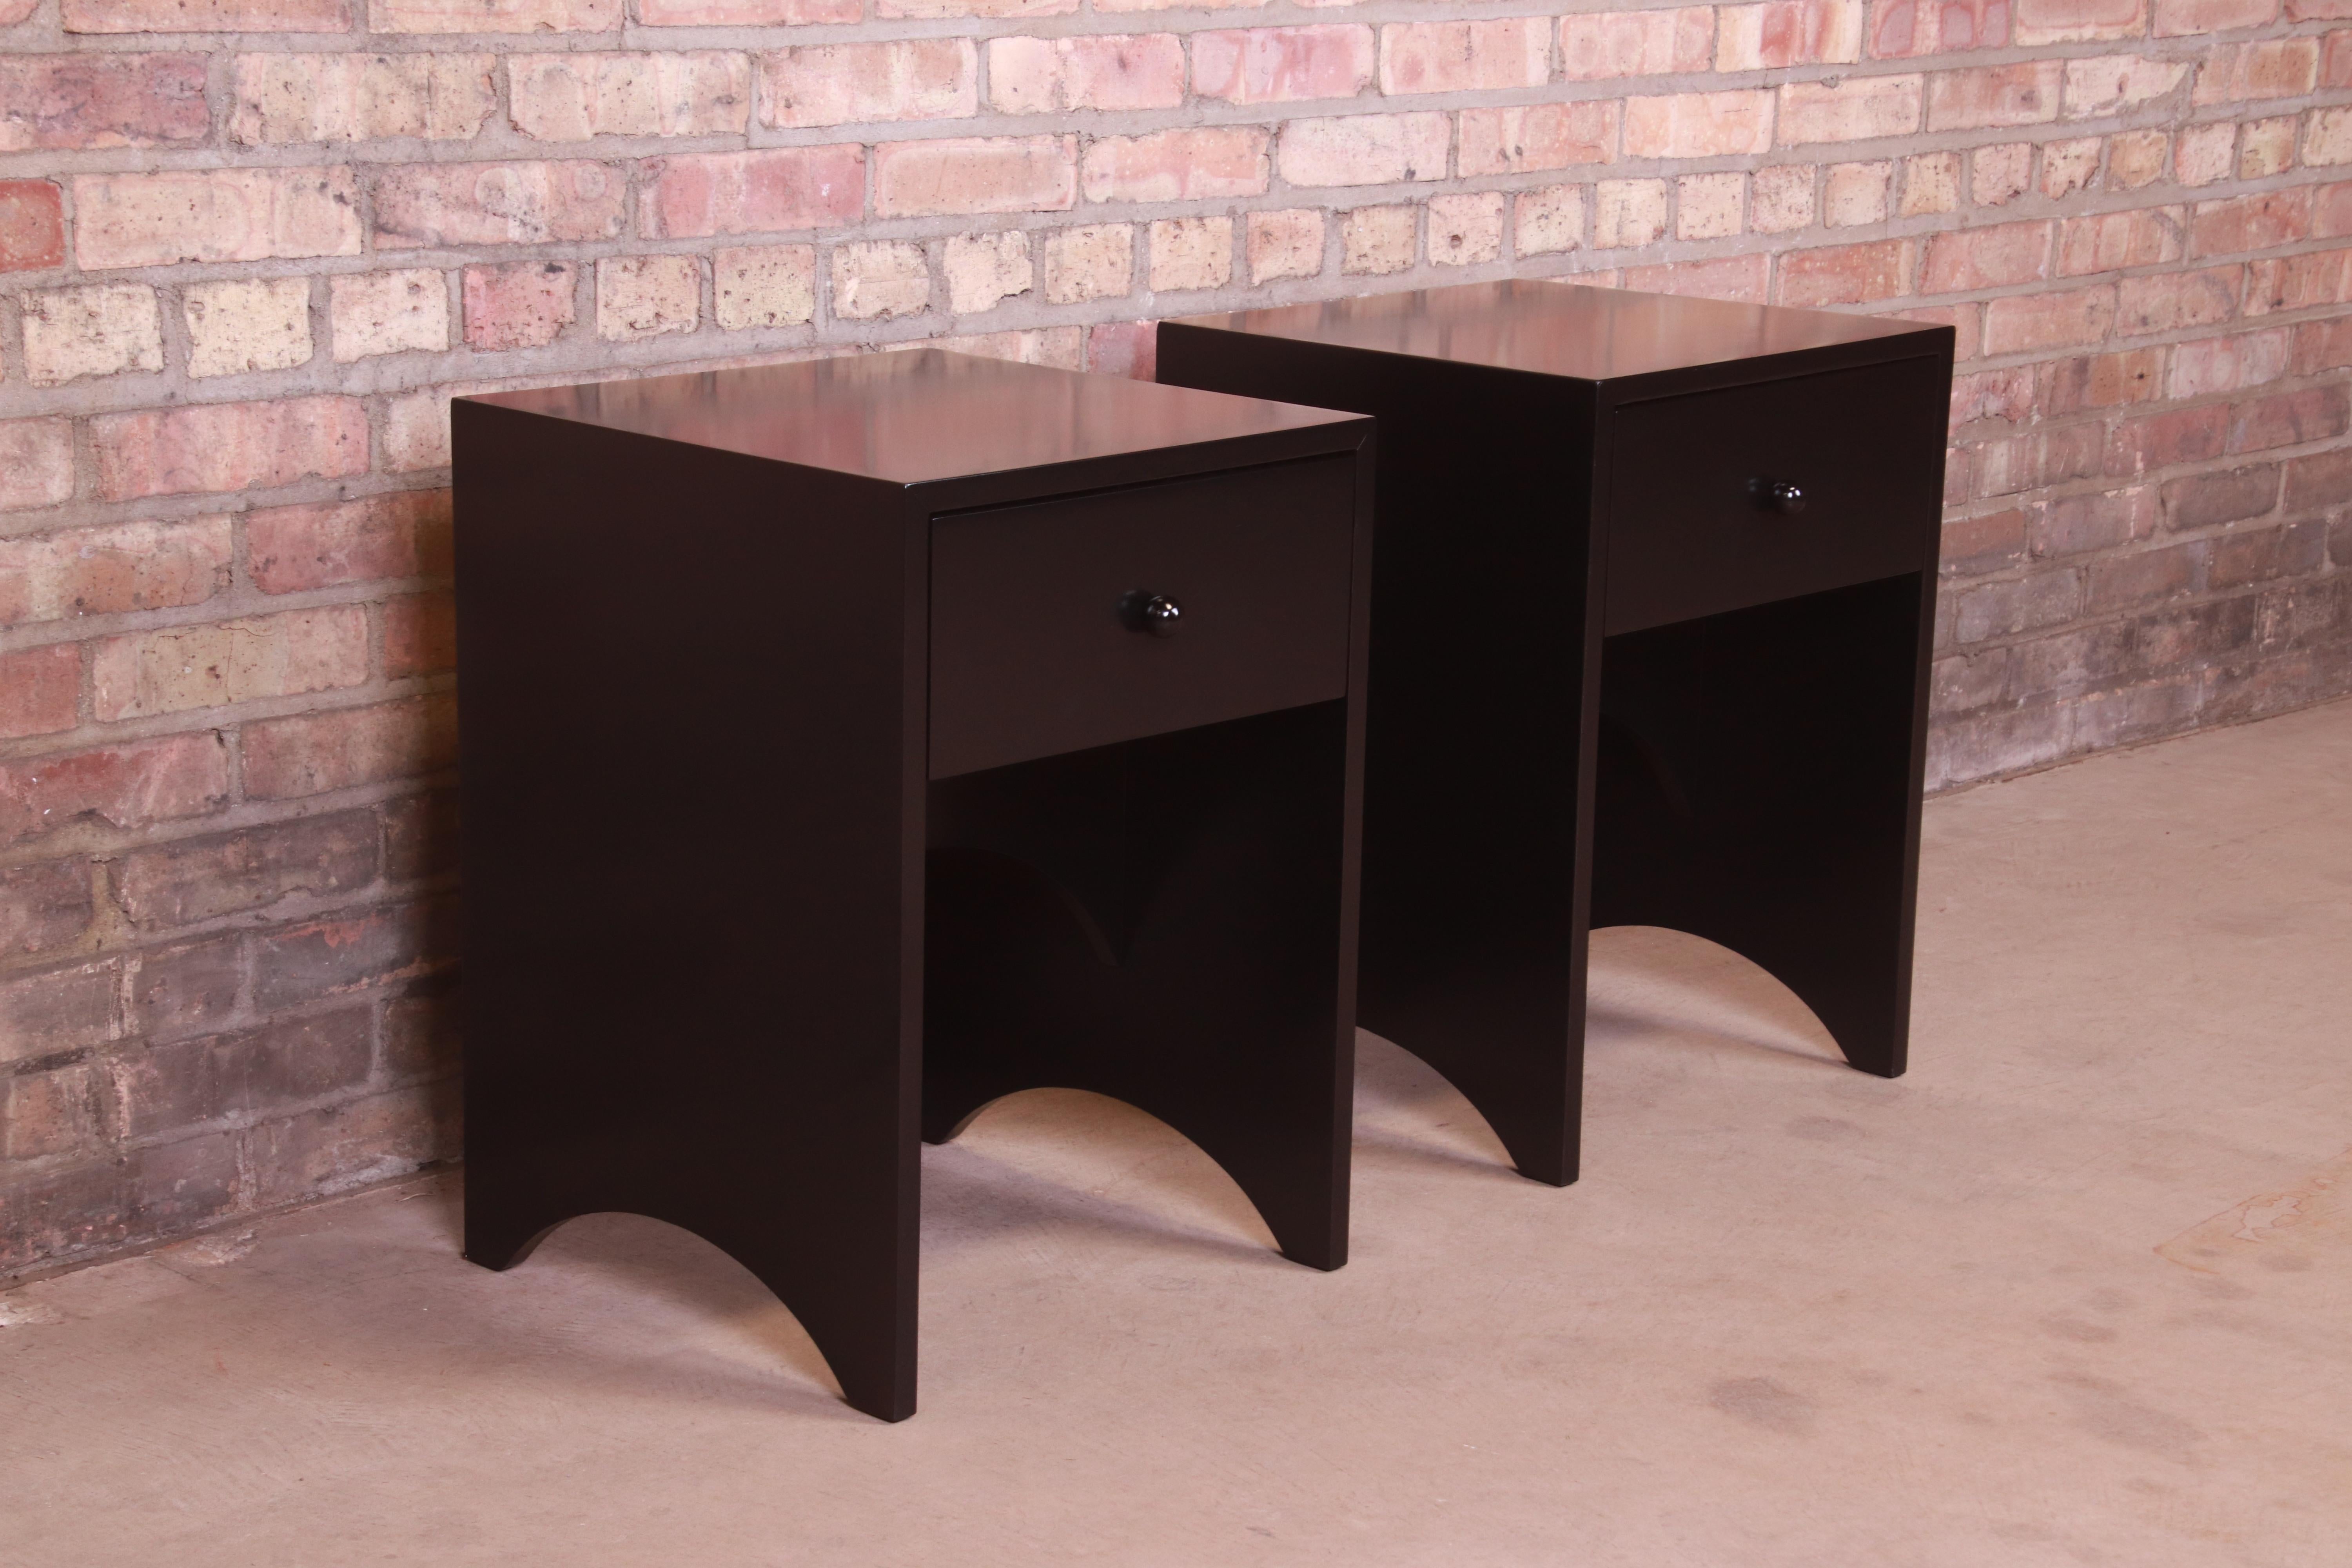 American Sergio Savarese for Dialogica Modern Black Lacquered Nightstands, Refinished